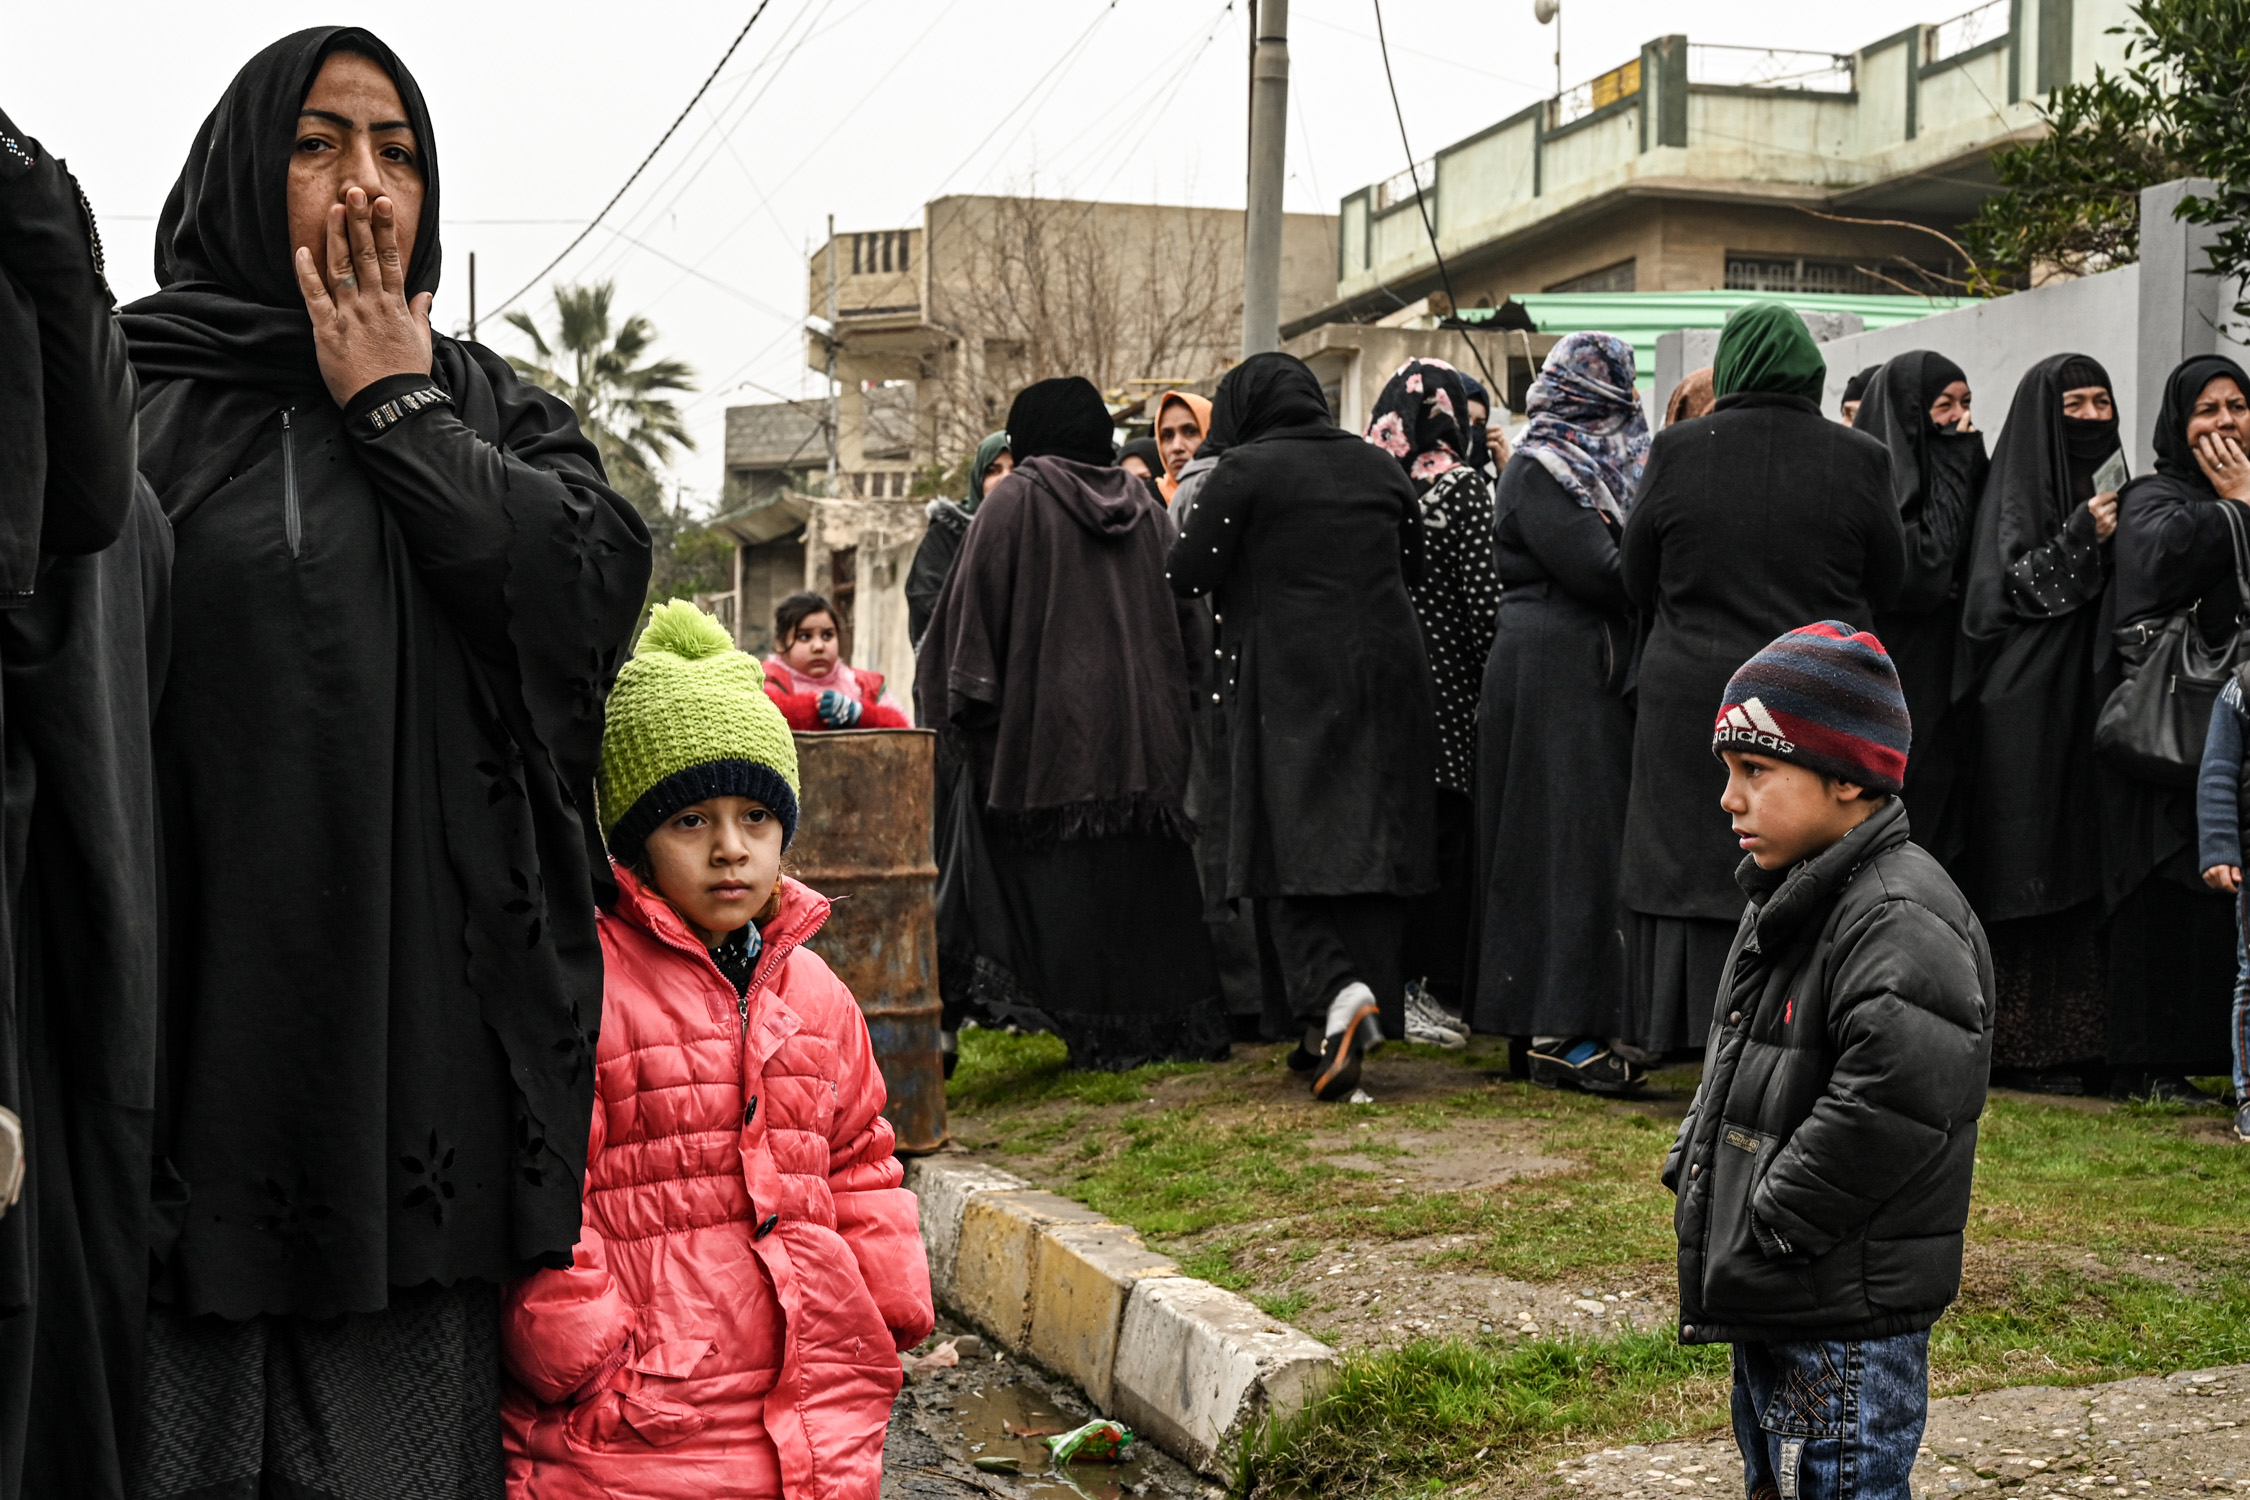 A woman waits with her children to receive aid at a handout in Mosul (MEE/Finbar Anderson)